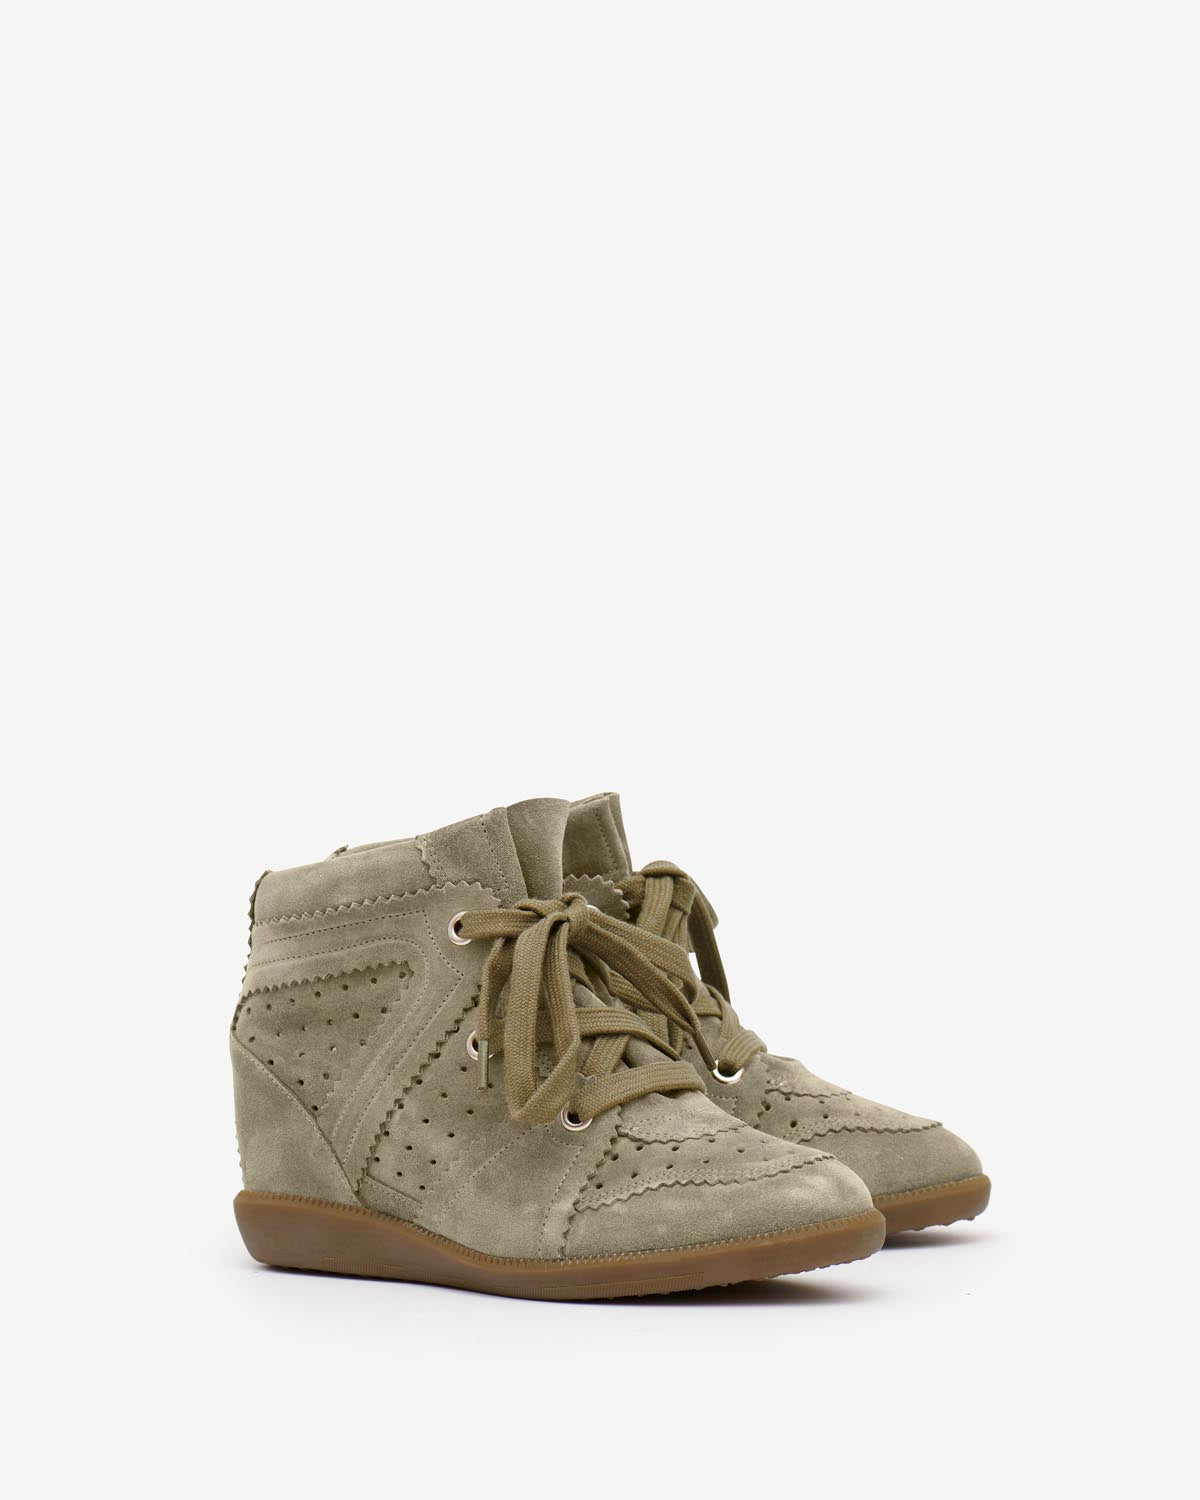 Bobby sneakers Woman Taupe 10